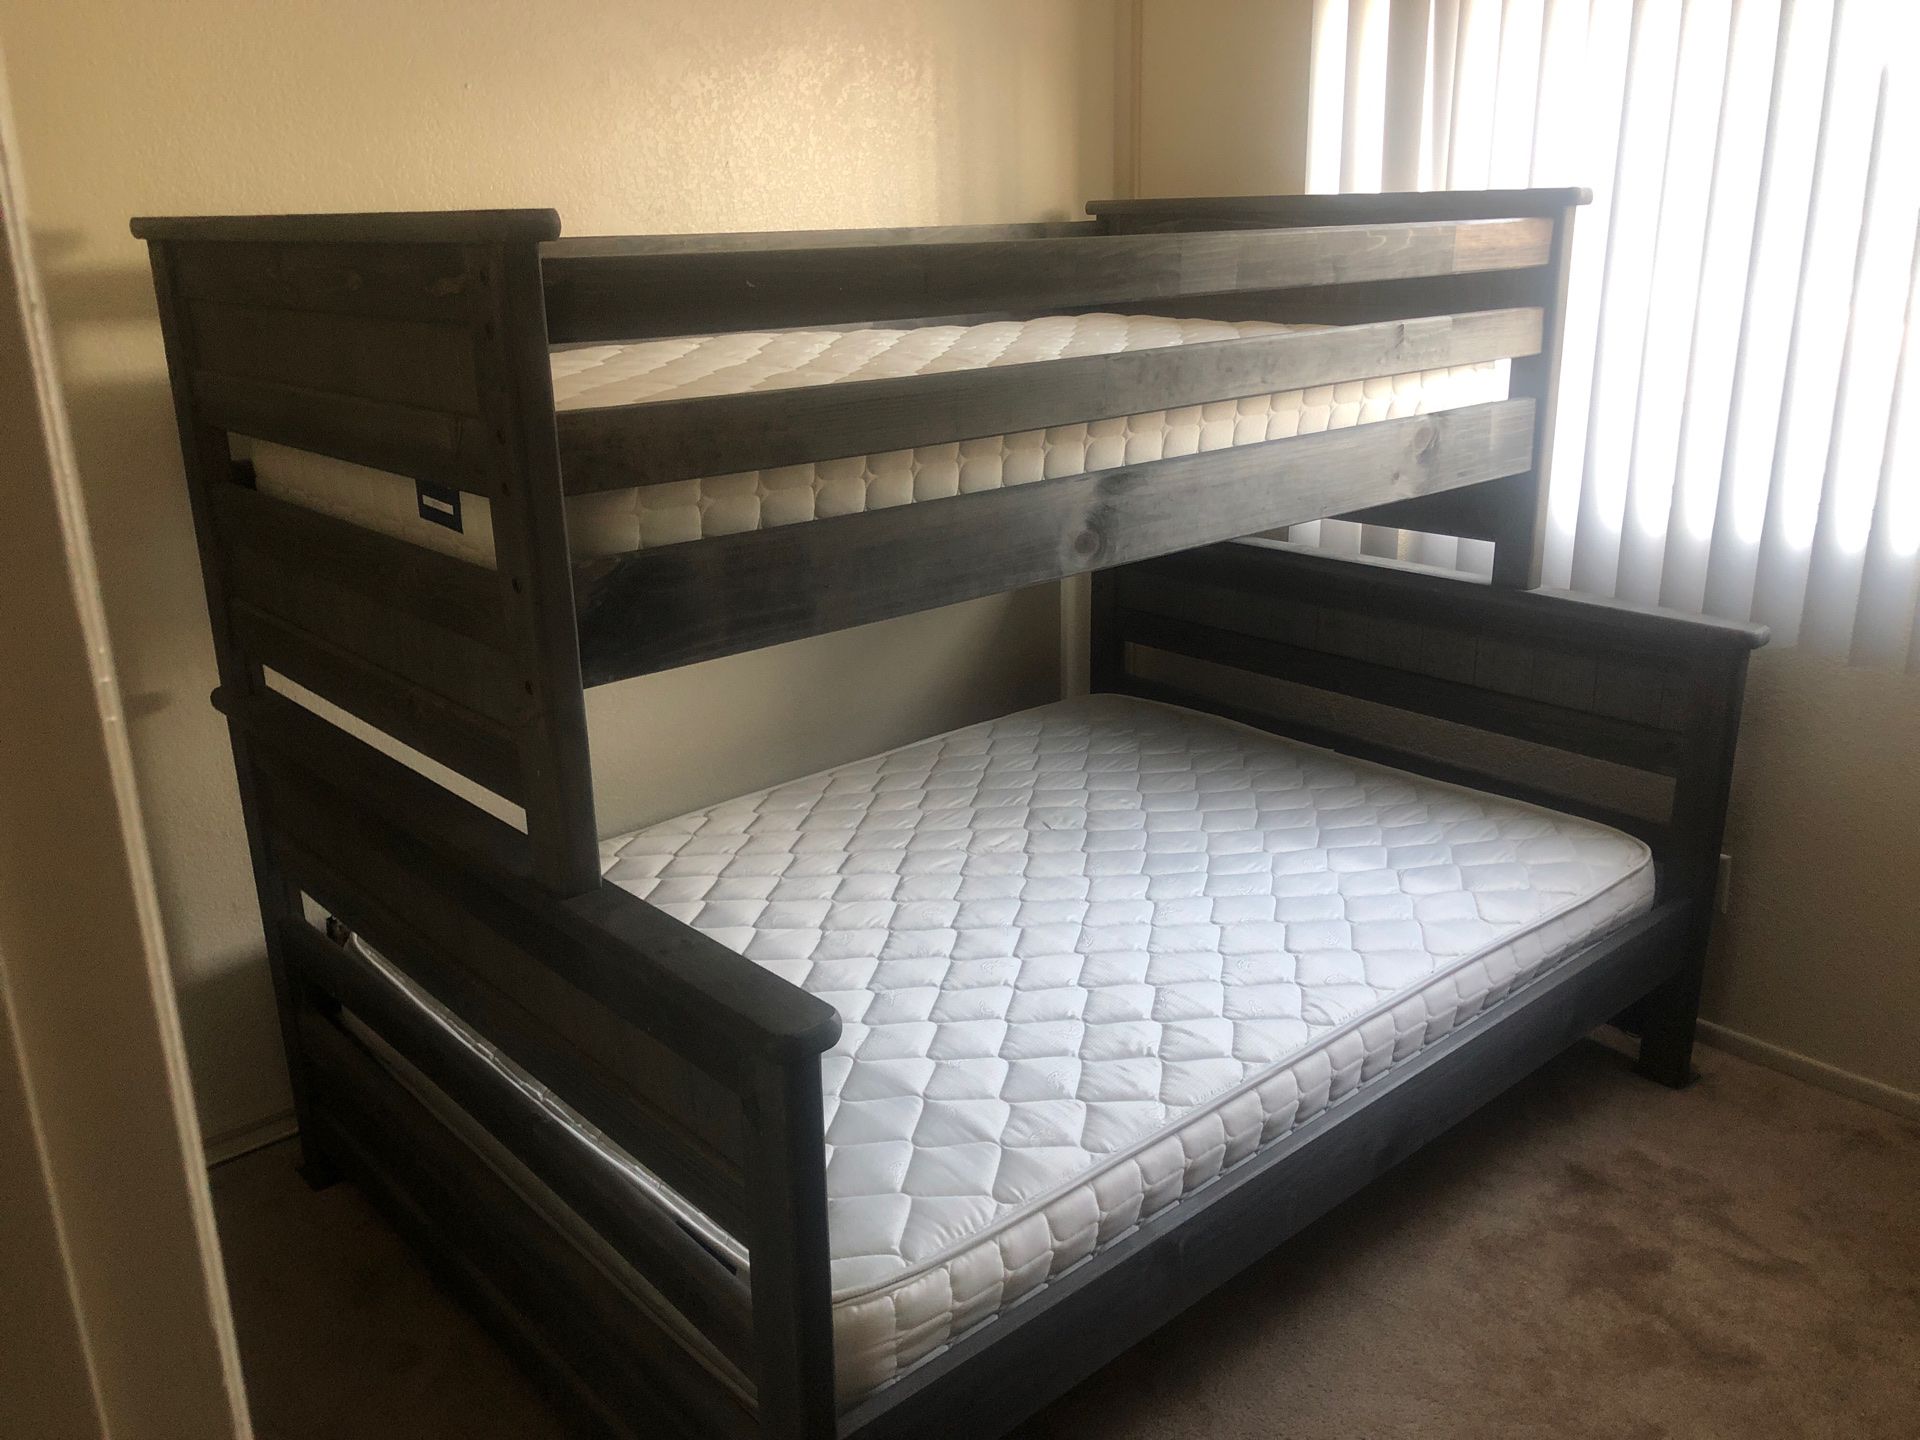 Bunk beds bought at living spaces